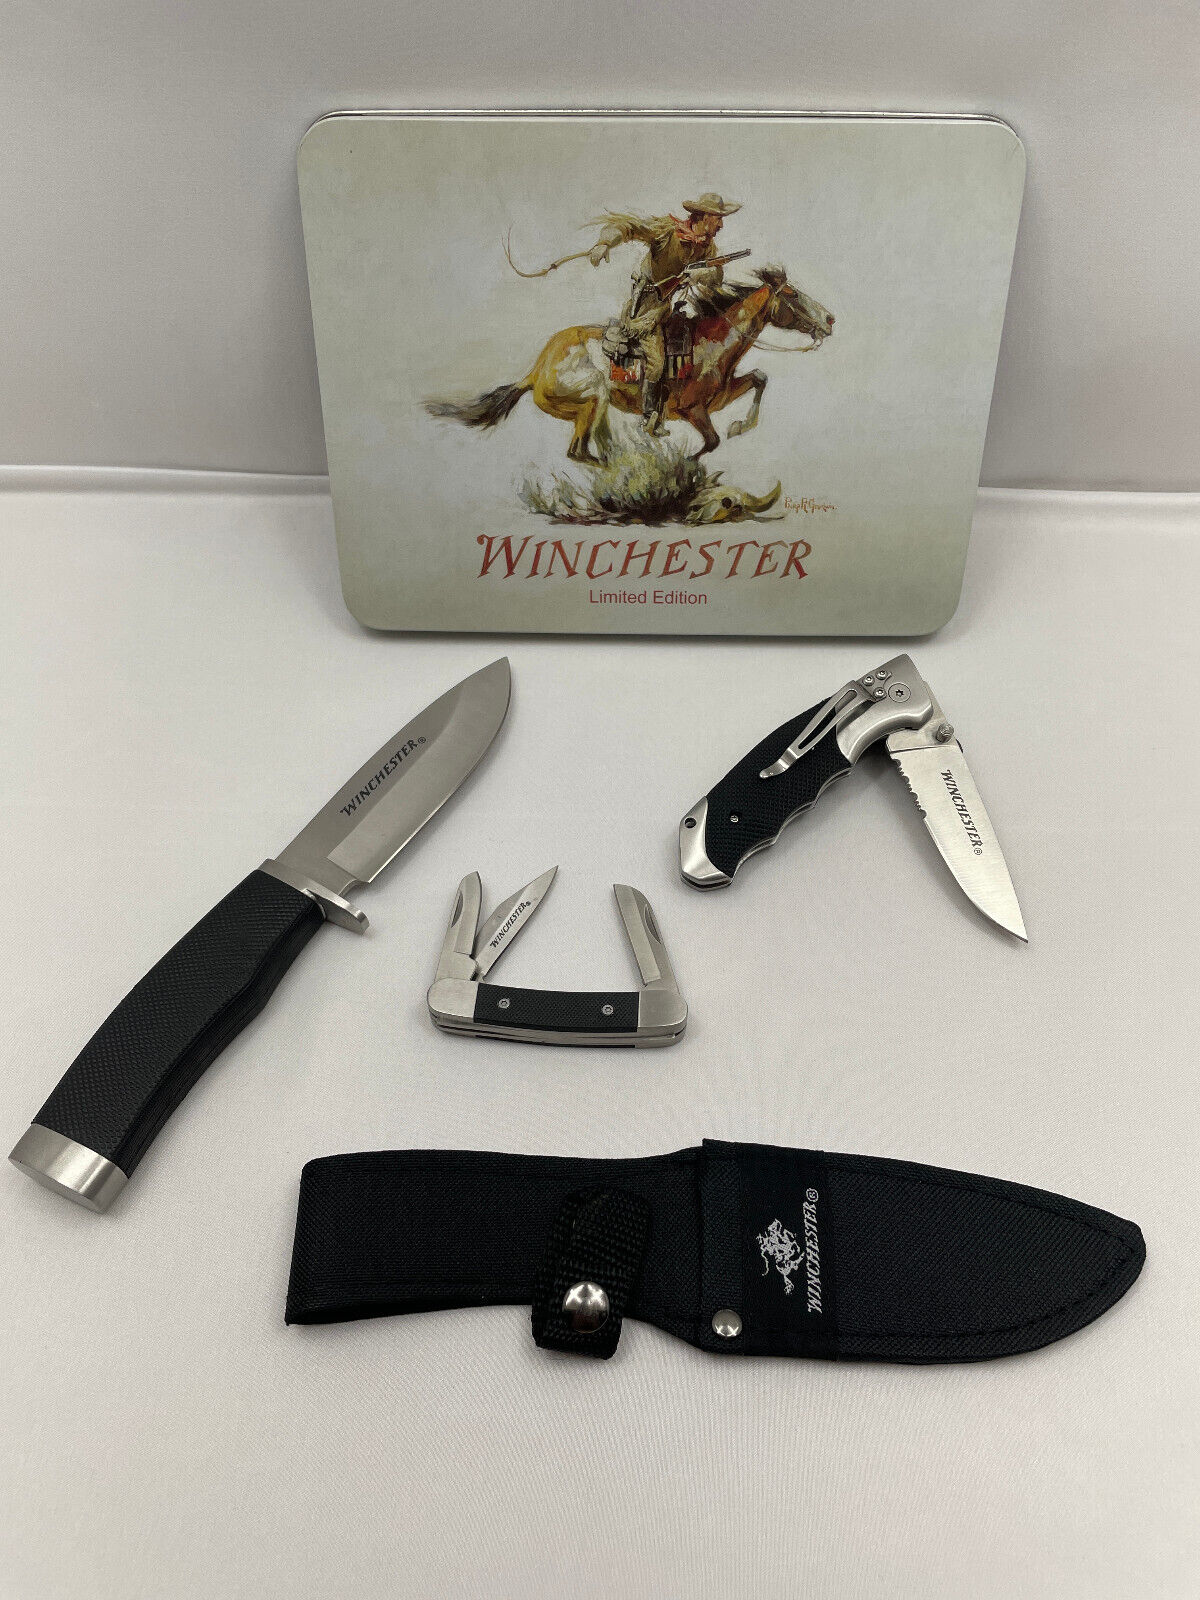 *RARE* Brand New Winchester Limited Edition 3 Knife Set with Rubber Grips